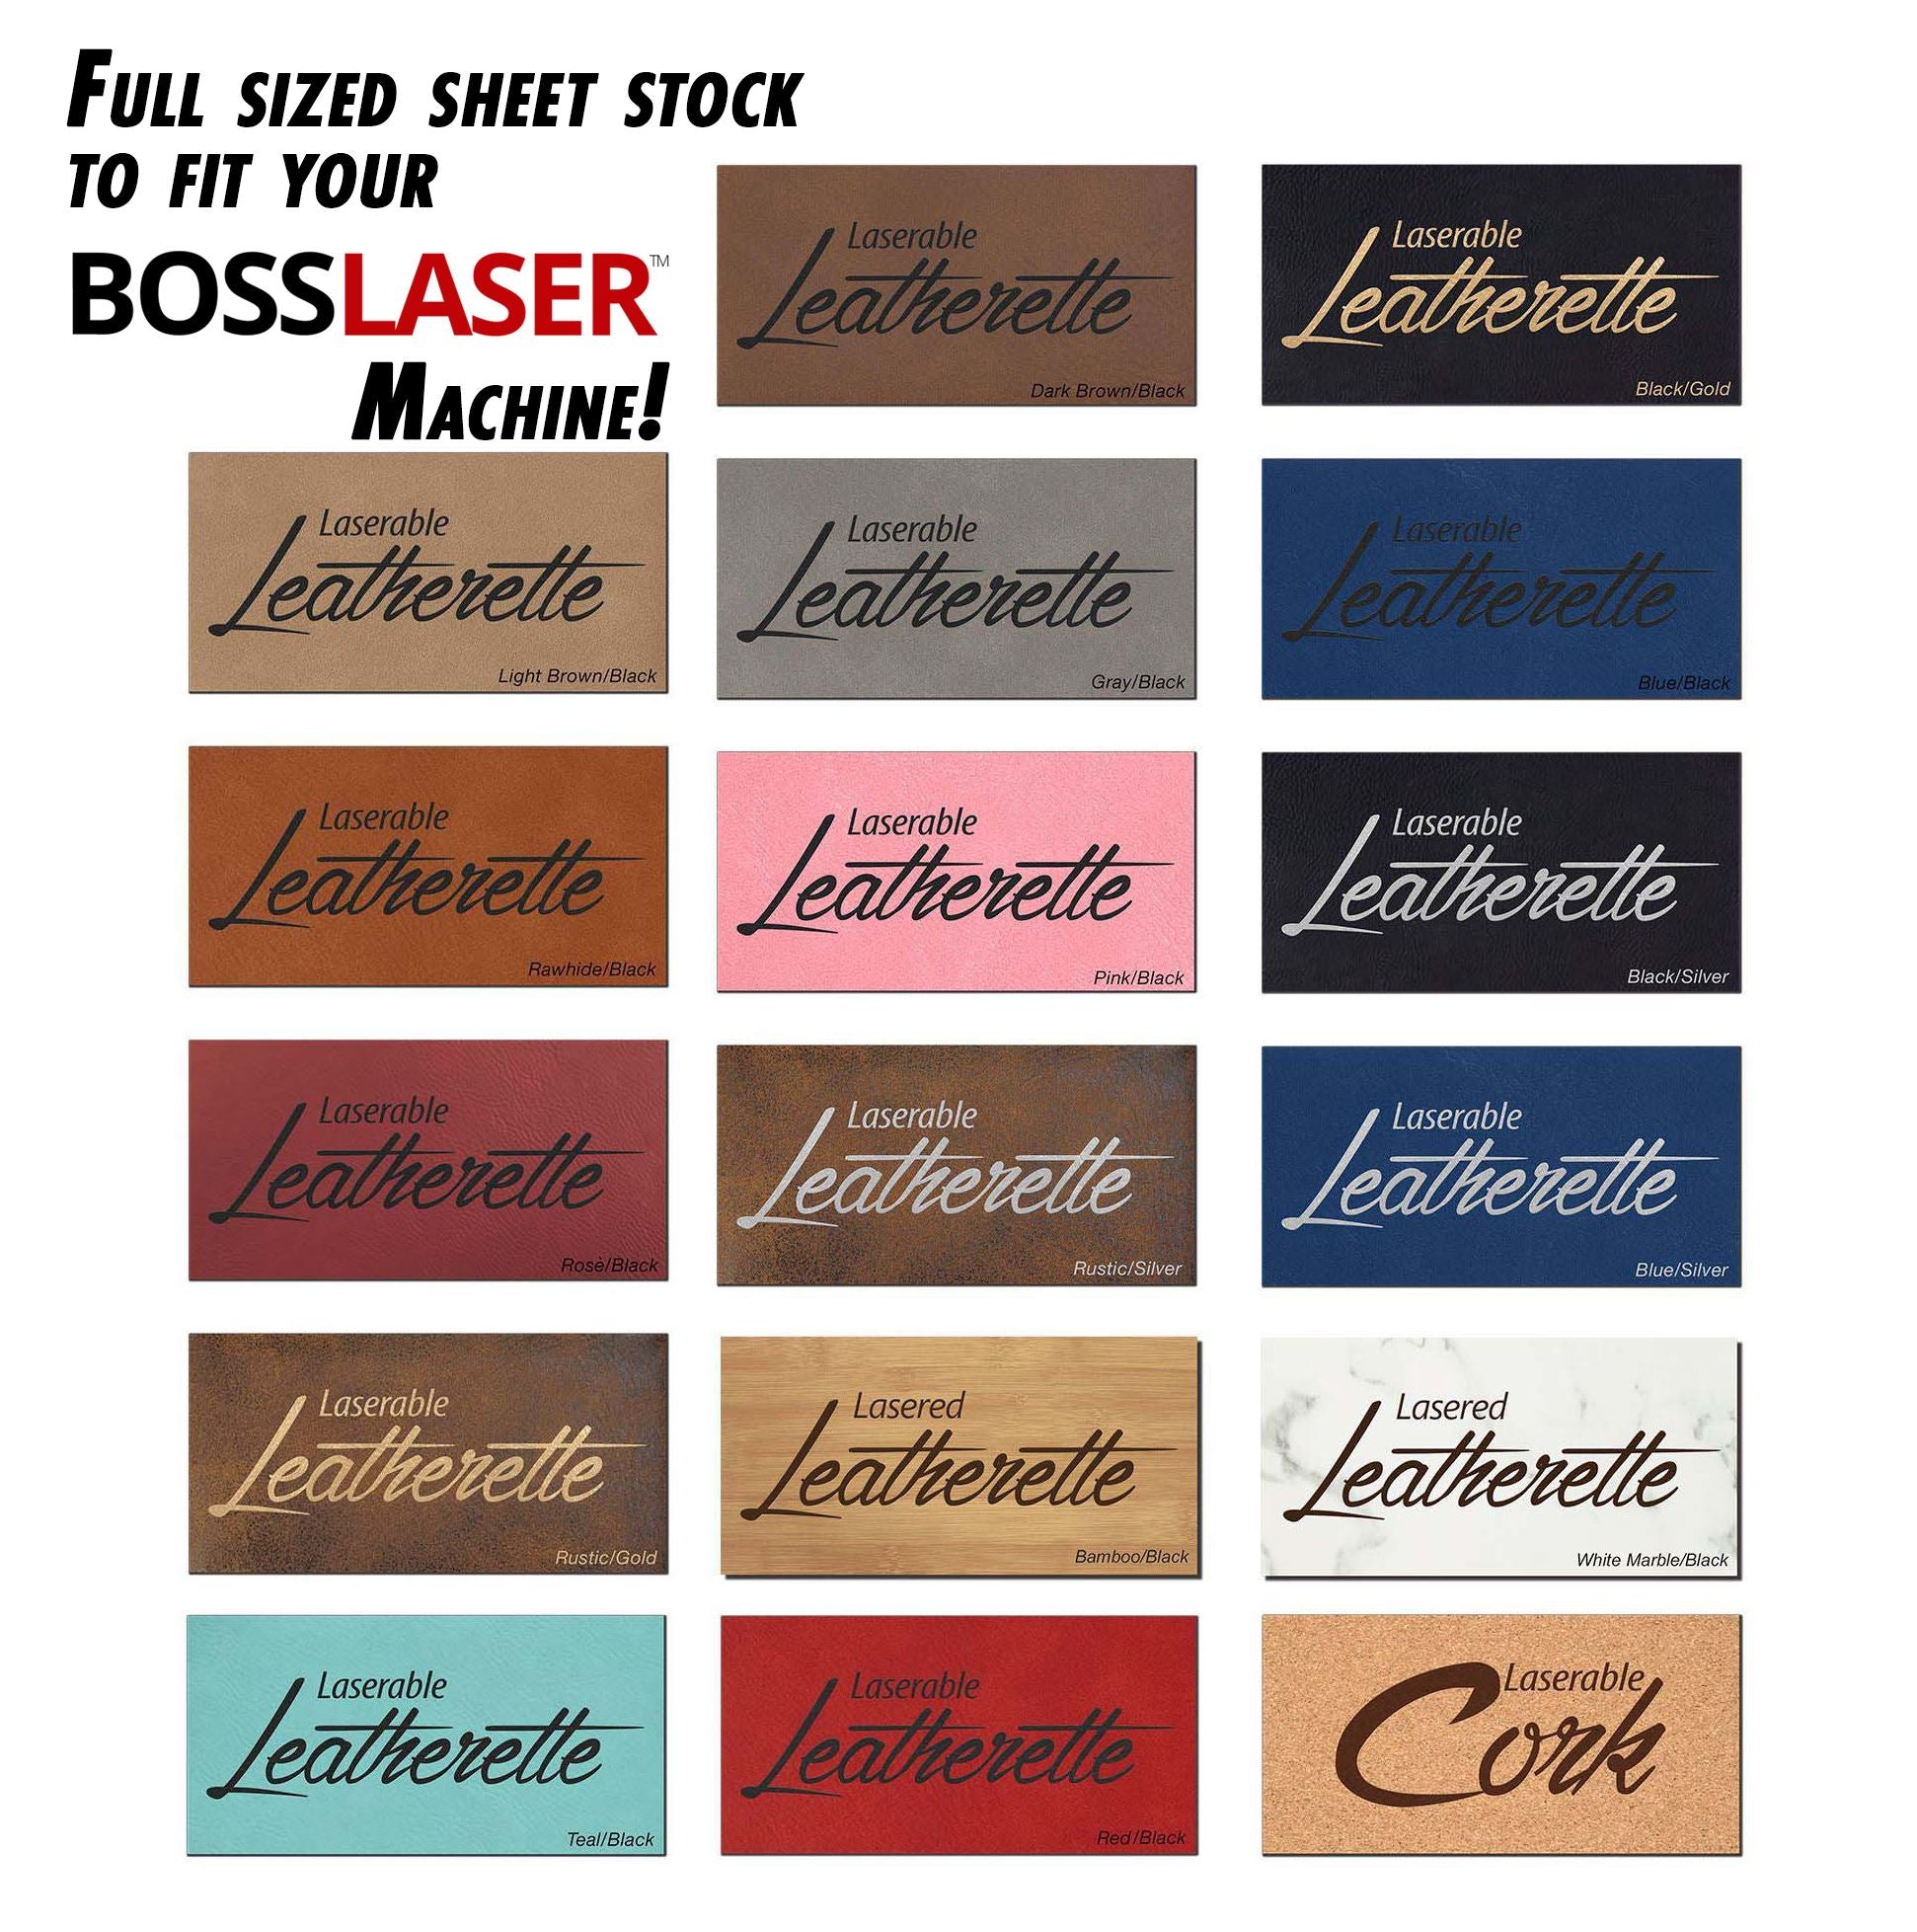 PRE-ORDER! Full Size Laserable Leatherette Sheet Stock, Boss Laser Engravers (Available Jan. 2022) Engraving Supplies Craftworks NW 